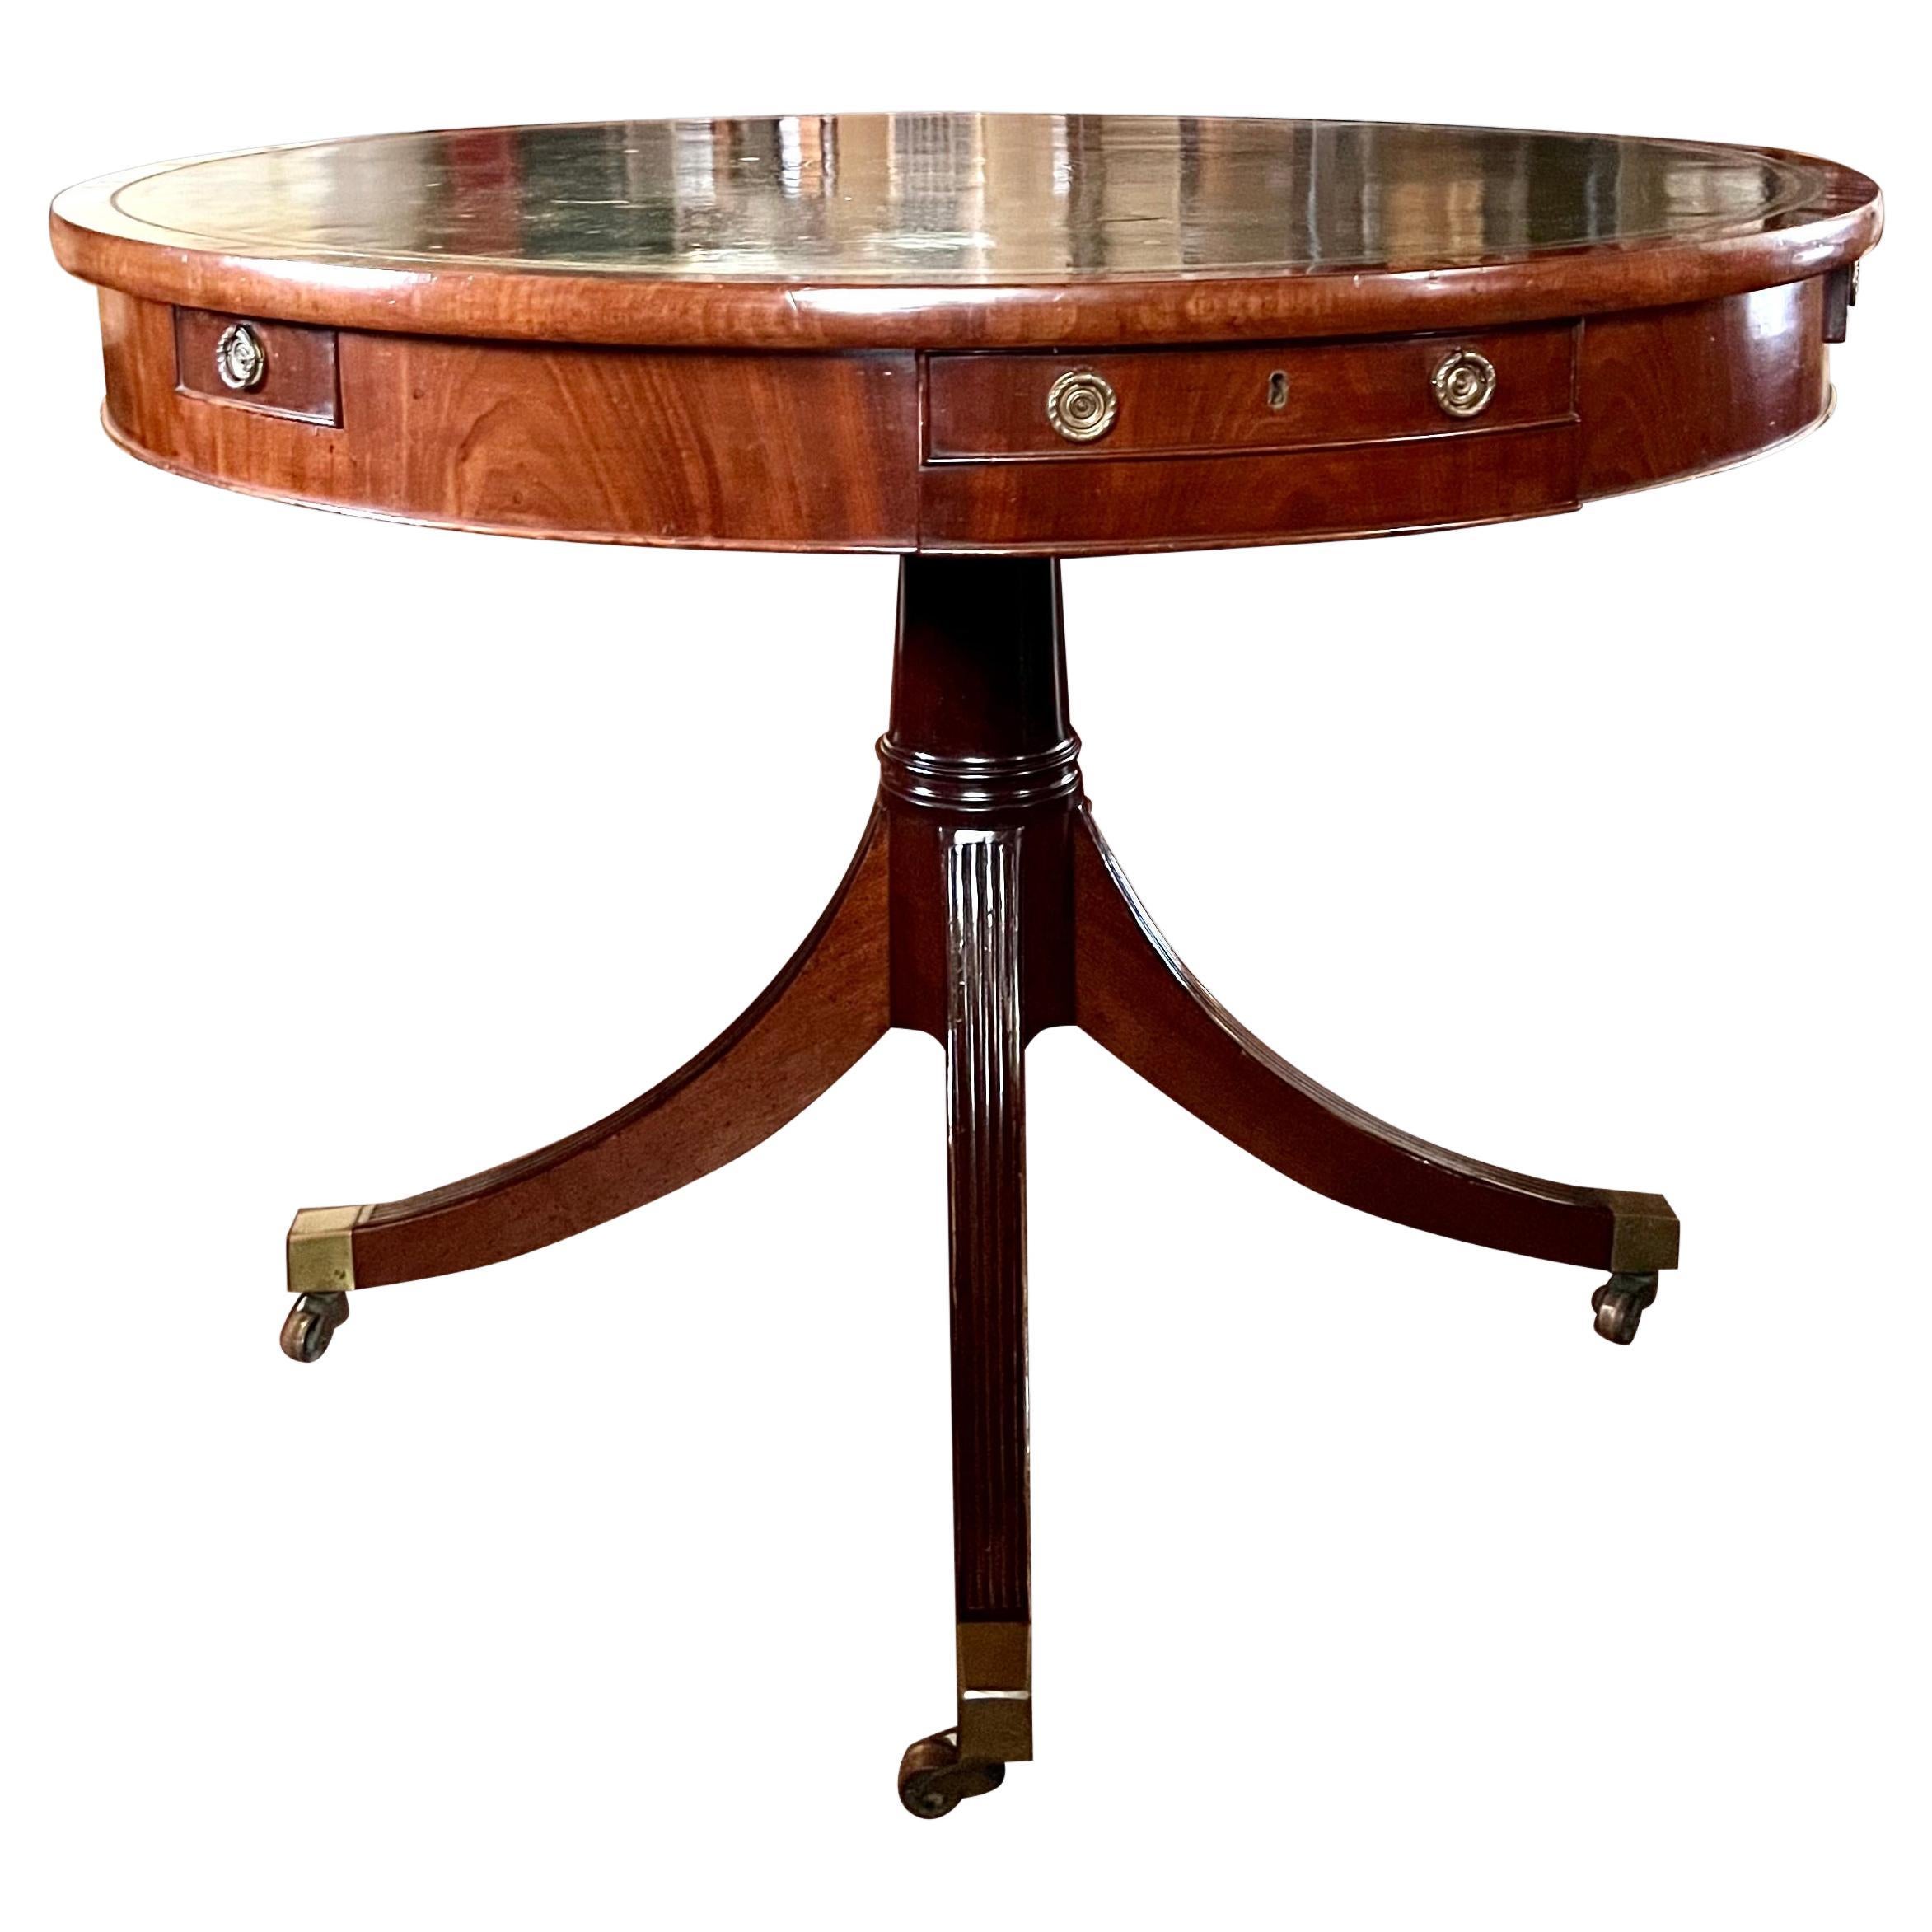 English Regency Style Mahogany Drum Table with Rotating Gilt-Tooled Leather Top For Sale